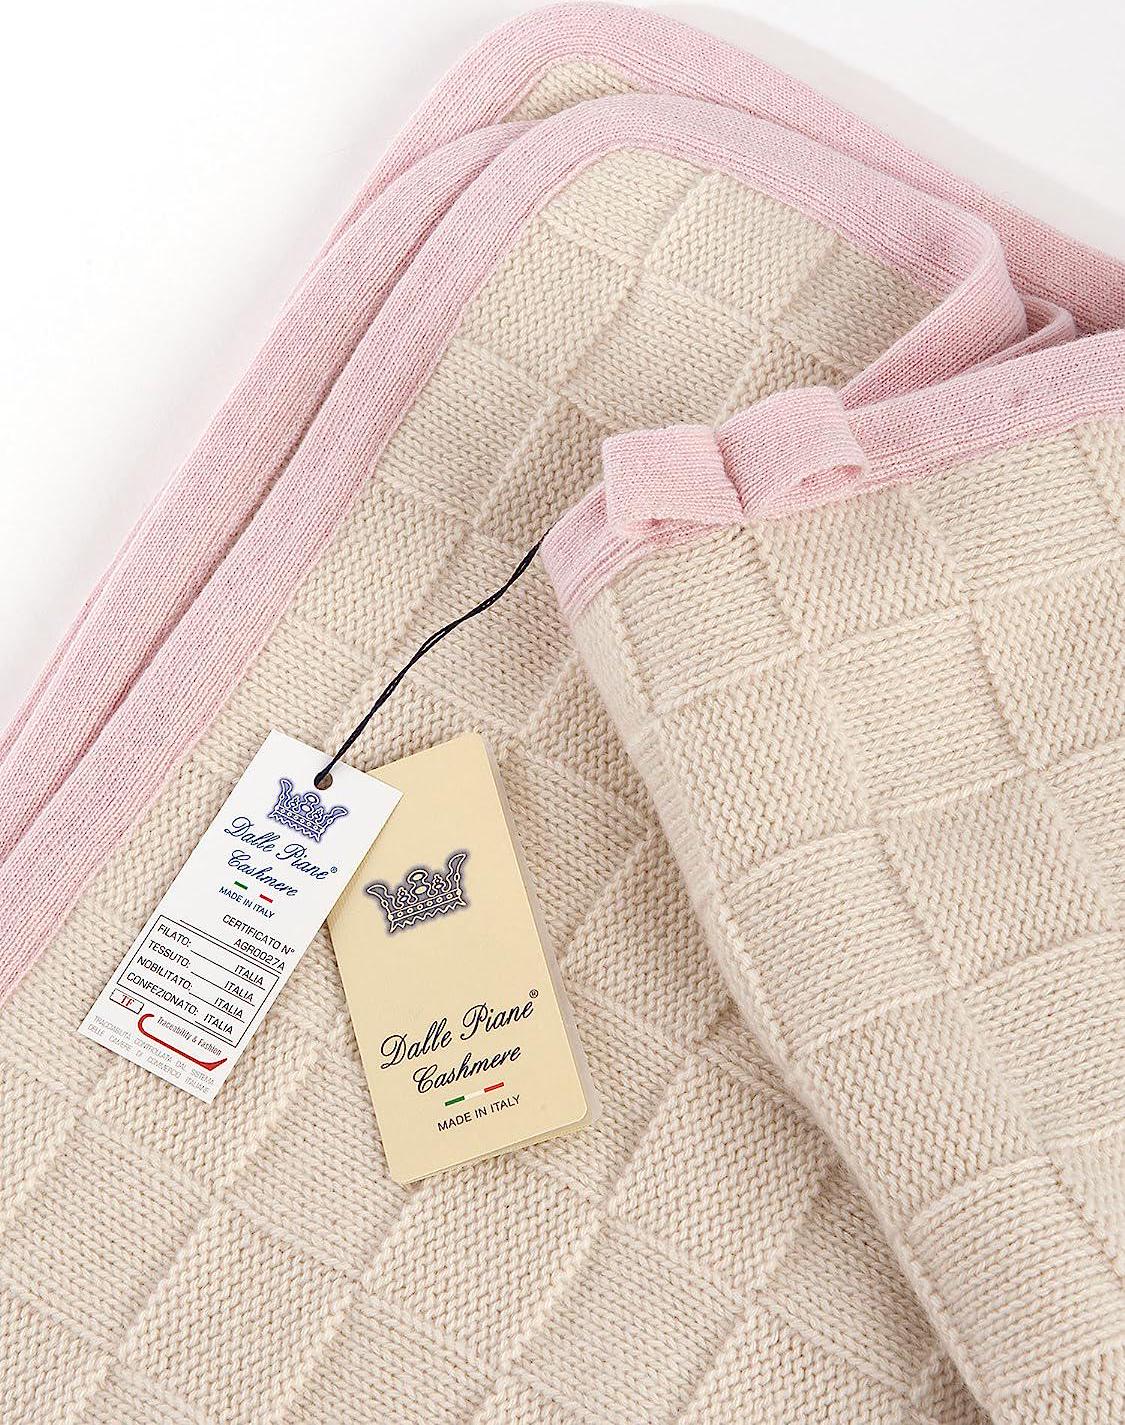 Dalle Piane Cashmere - Pure Cashmere Made in Italy Baby Blanket - Color: Pink